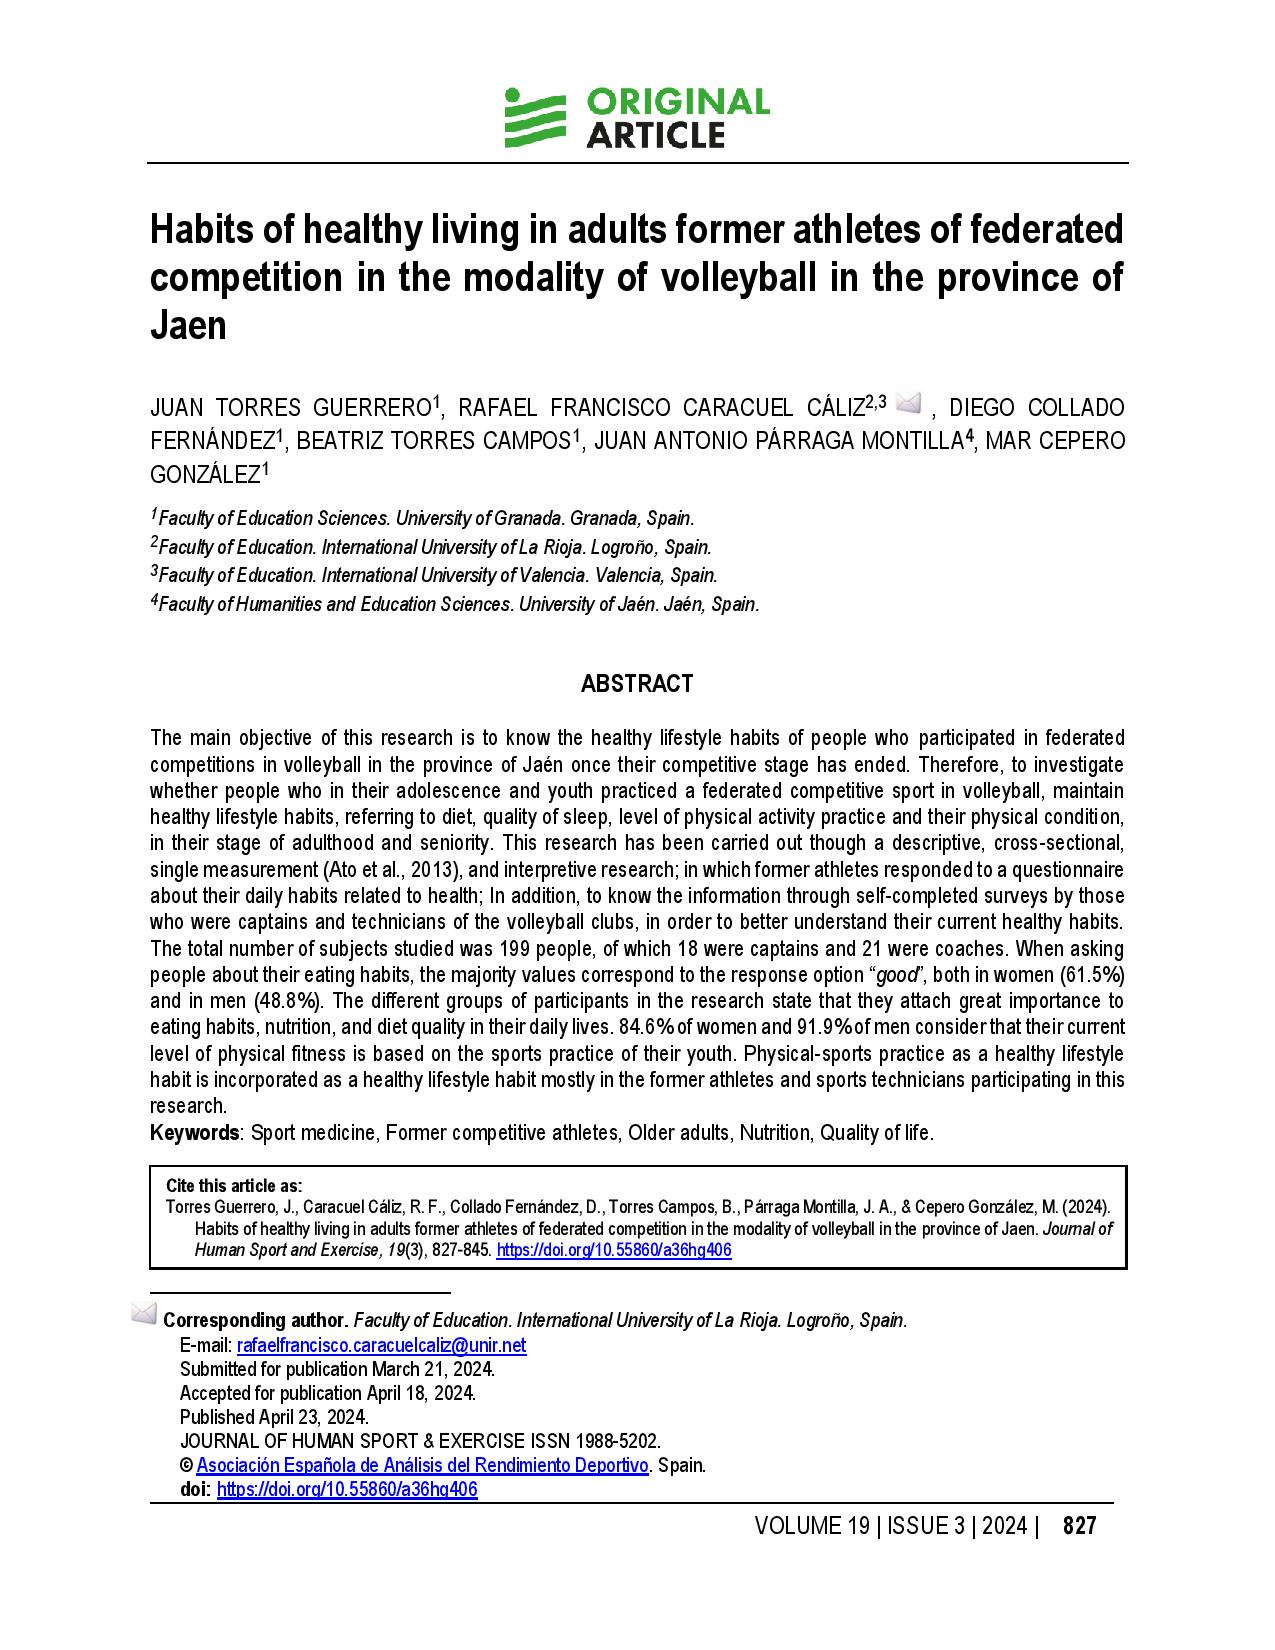 Habits of healthy living in adults former athletes of federated competition in the modality of volleyball in the province of Jaen